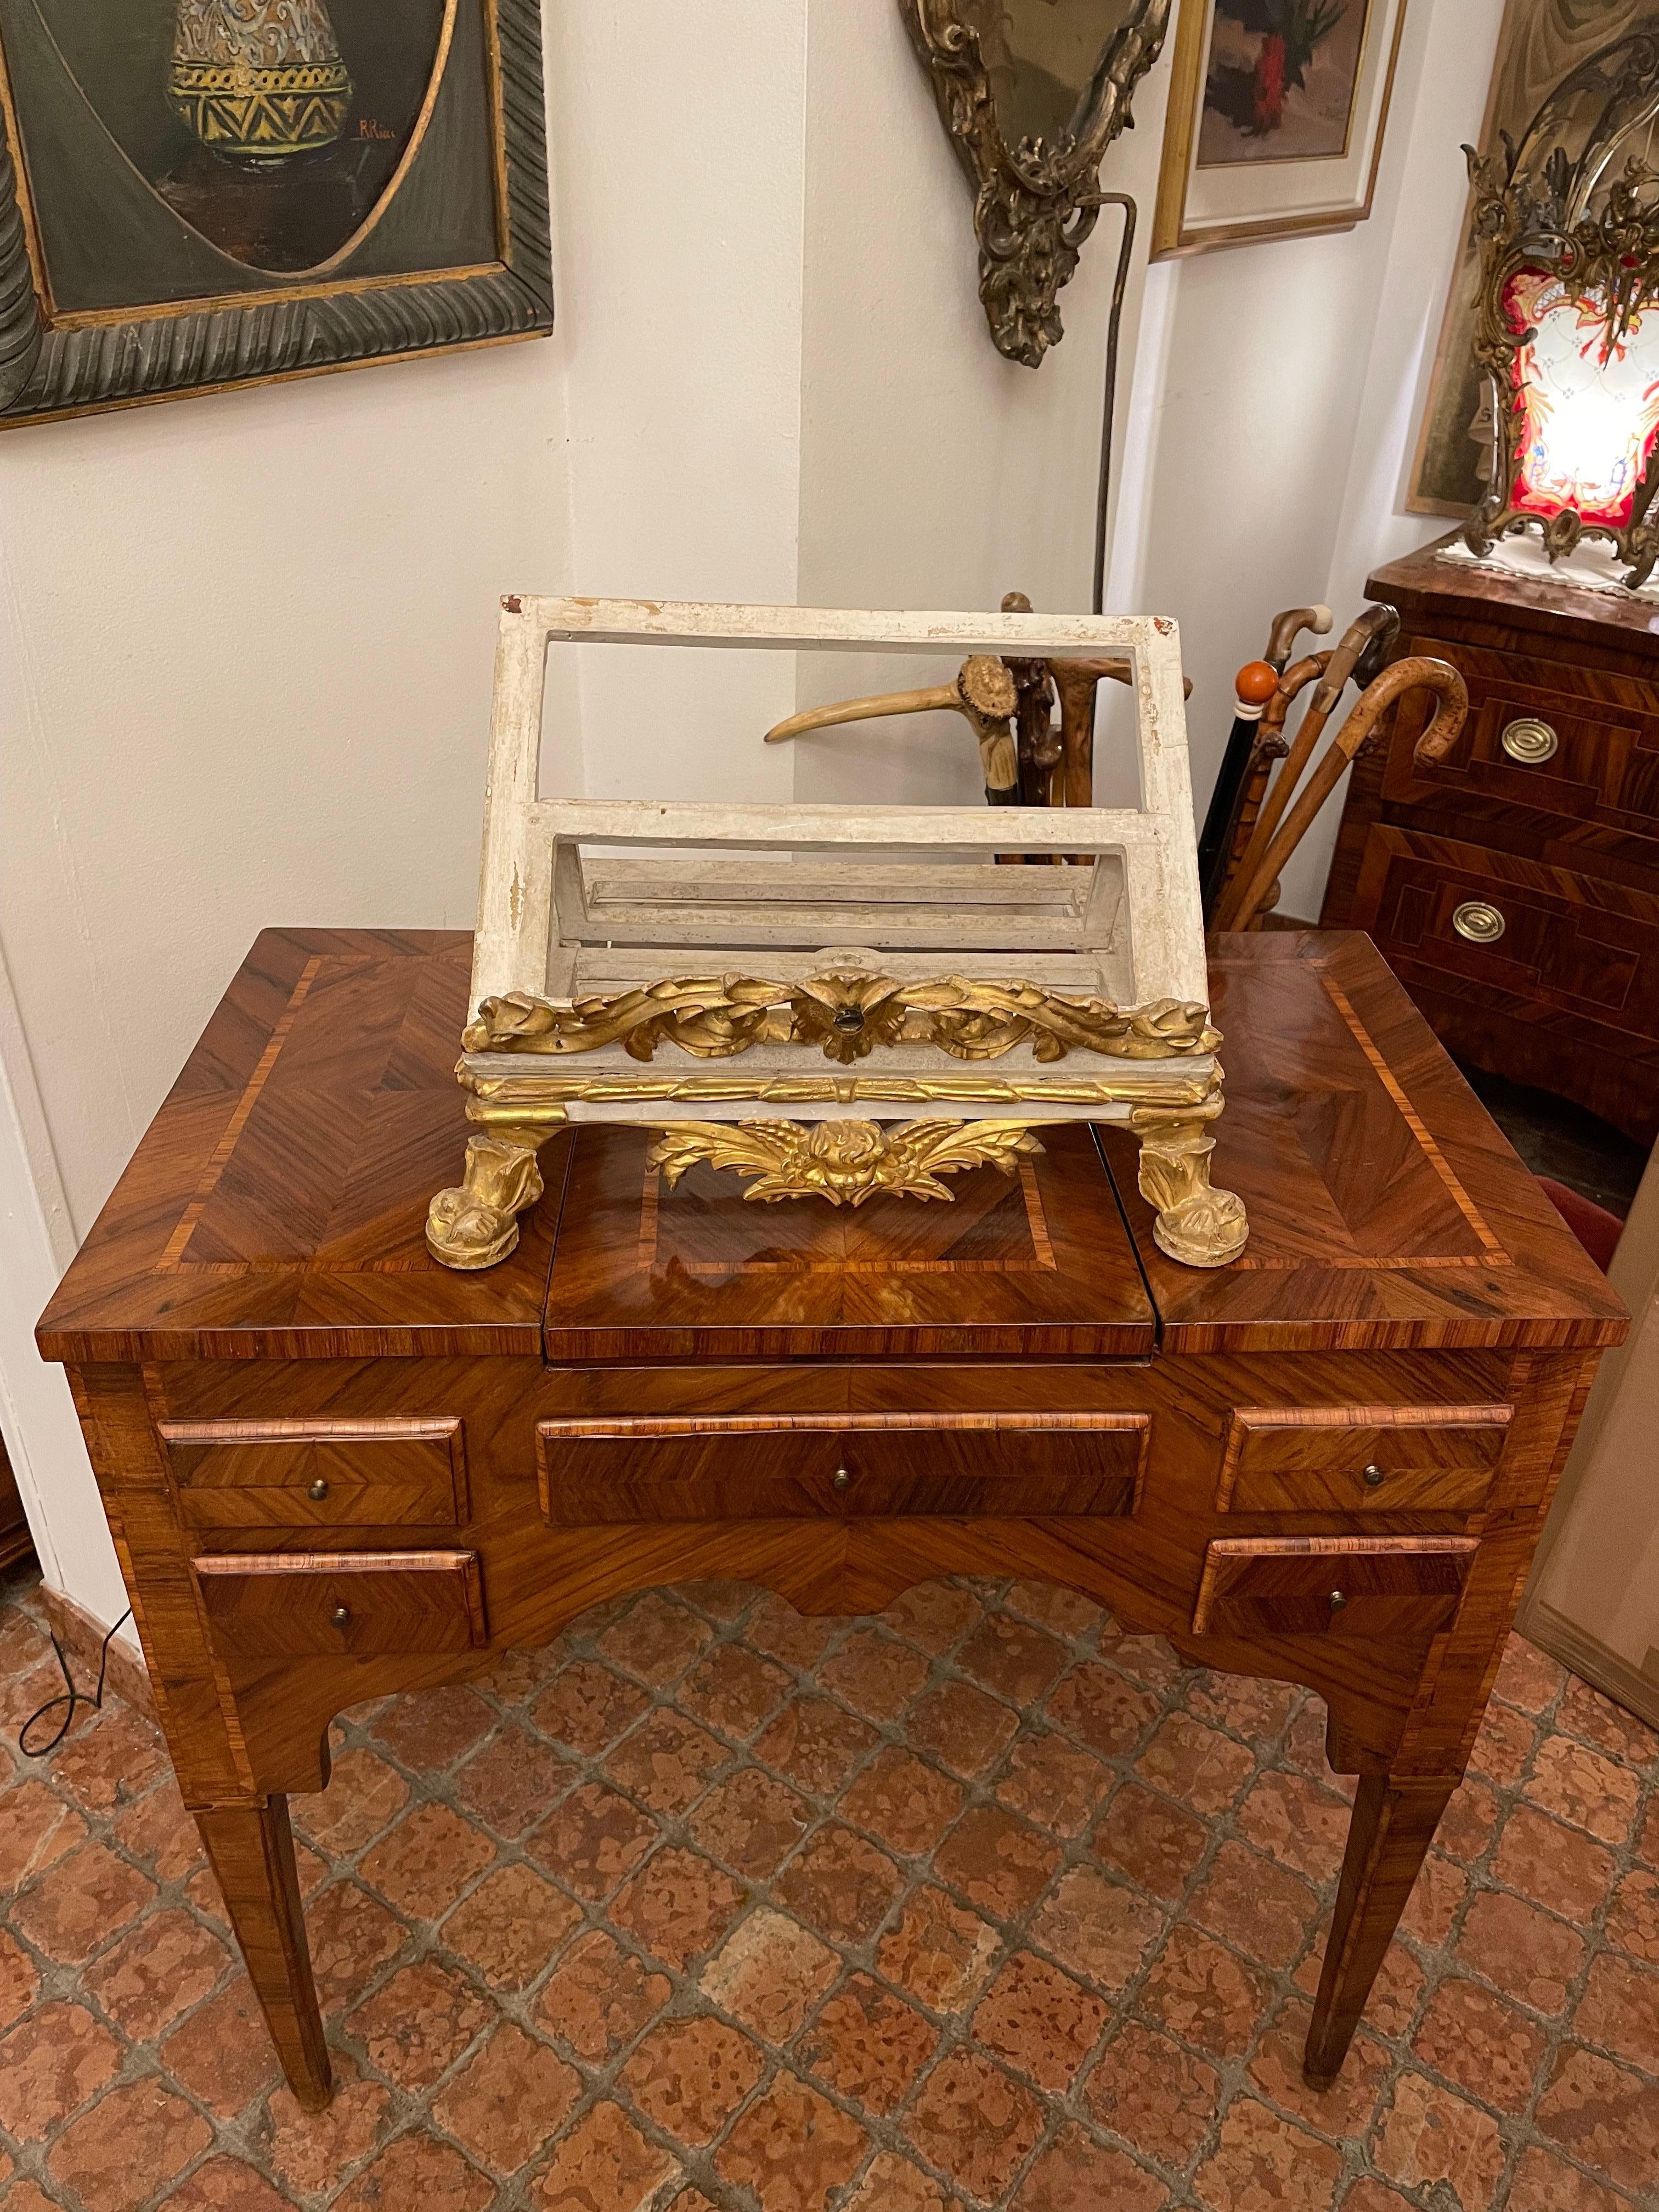 From Italy, an exclusive 18th century Louis XVI carved and gilded table lectern, an antique spruce wood bookstand or music stand carved with scrolling motifs centered by a cherub head and painted in ivory color.
This antique reading bookstand is